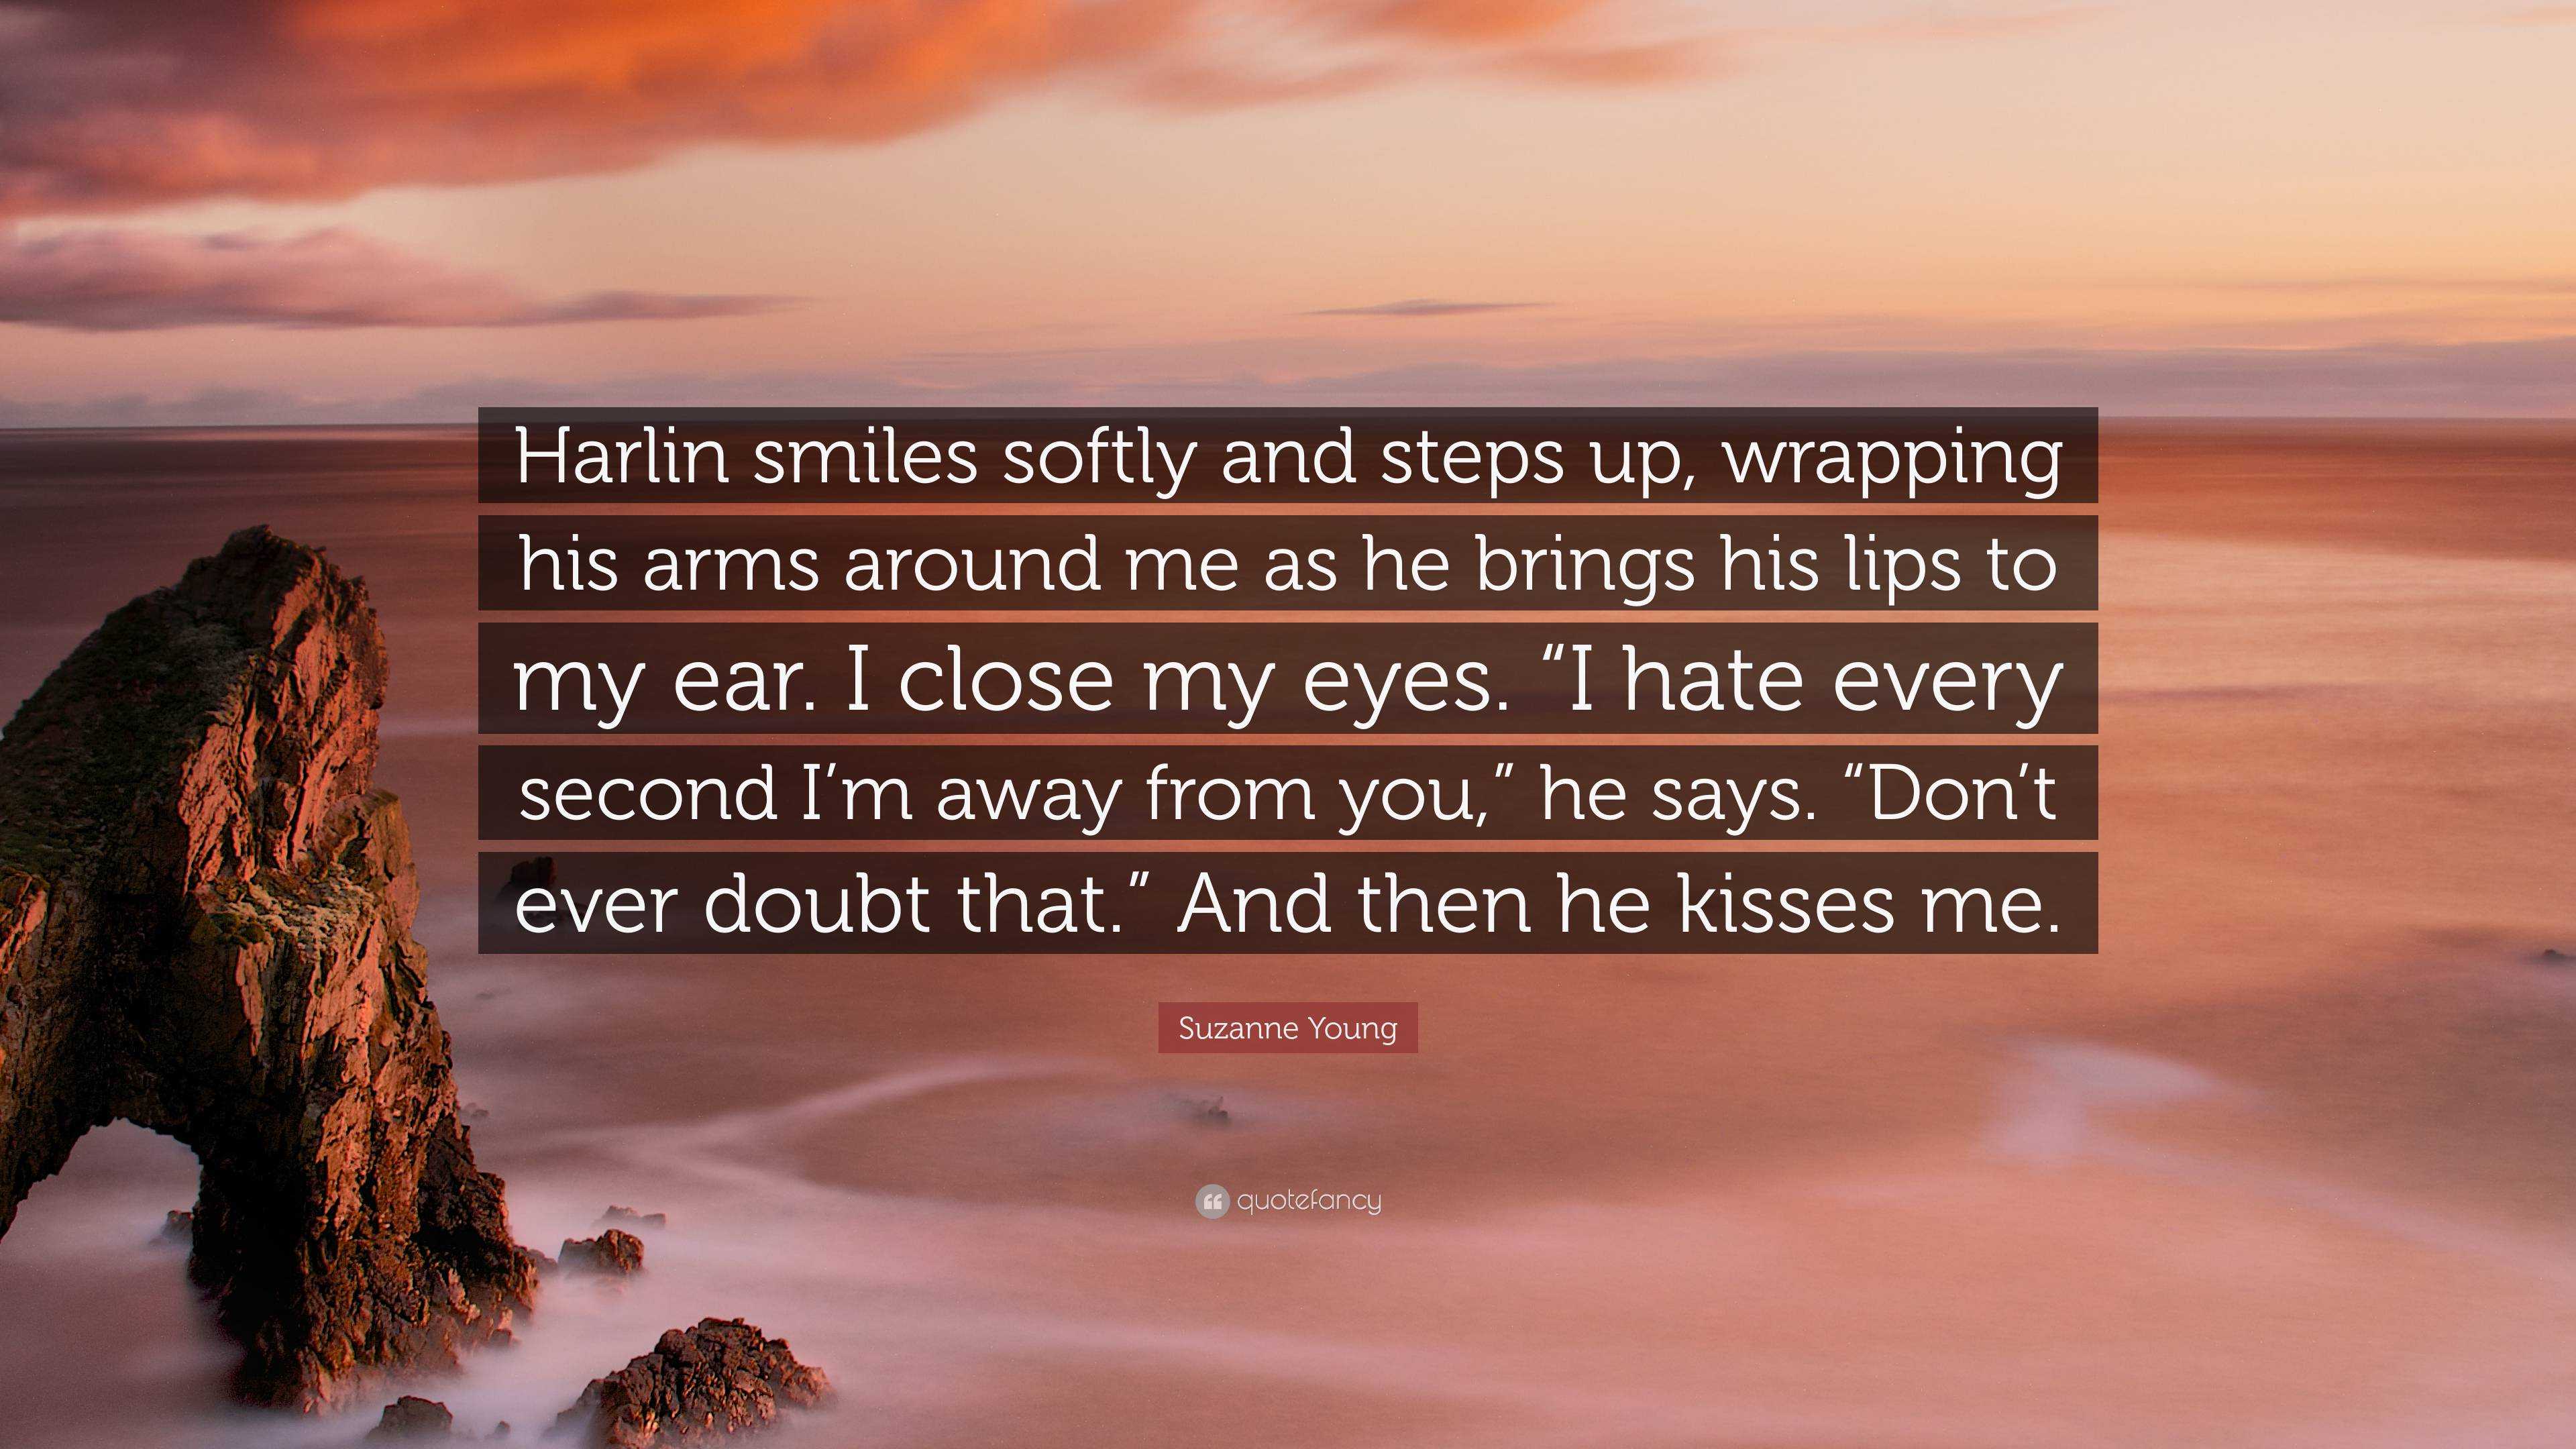 Suzanne Young Quote: “Harlin smiles softly and steps up, wrapping his arms  around me as he brings his lips to my ear. I close my eyes. “I hate”